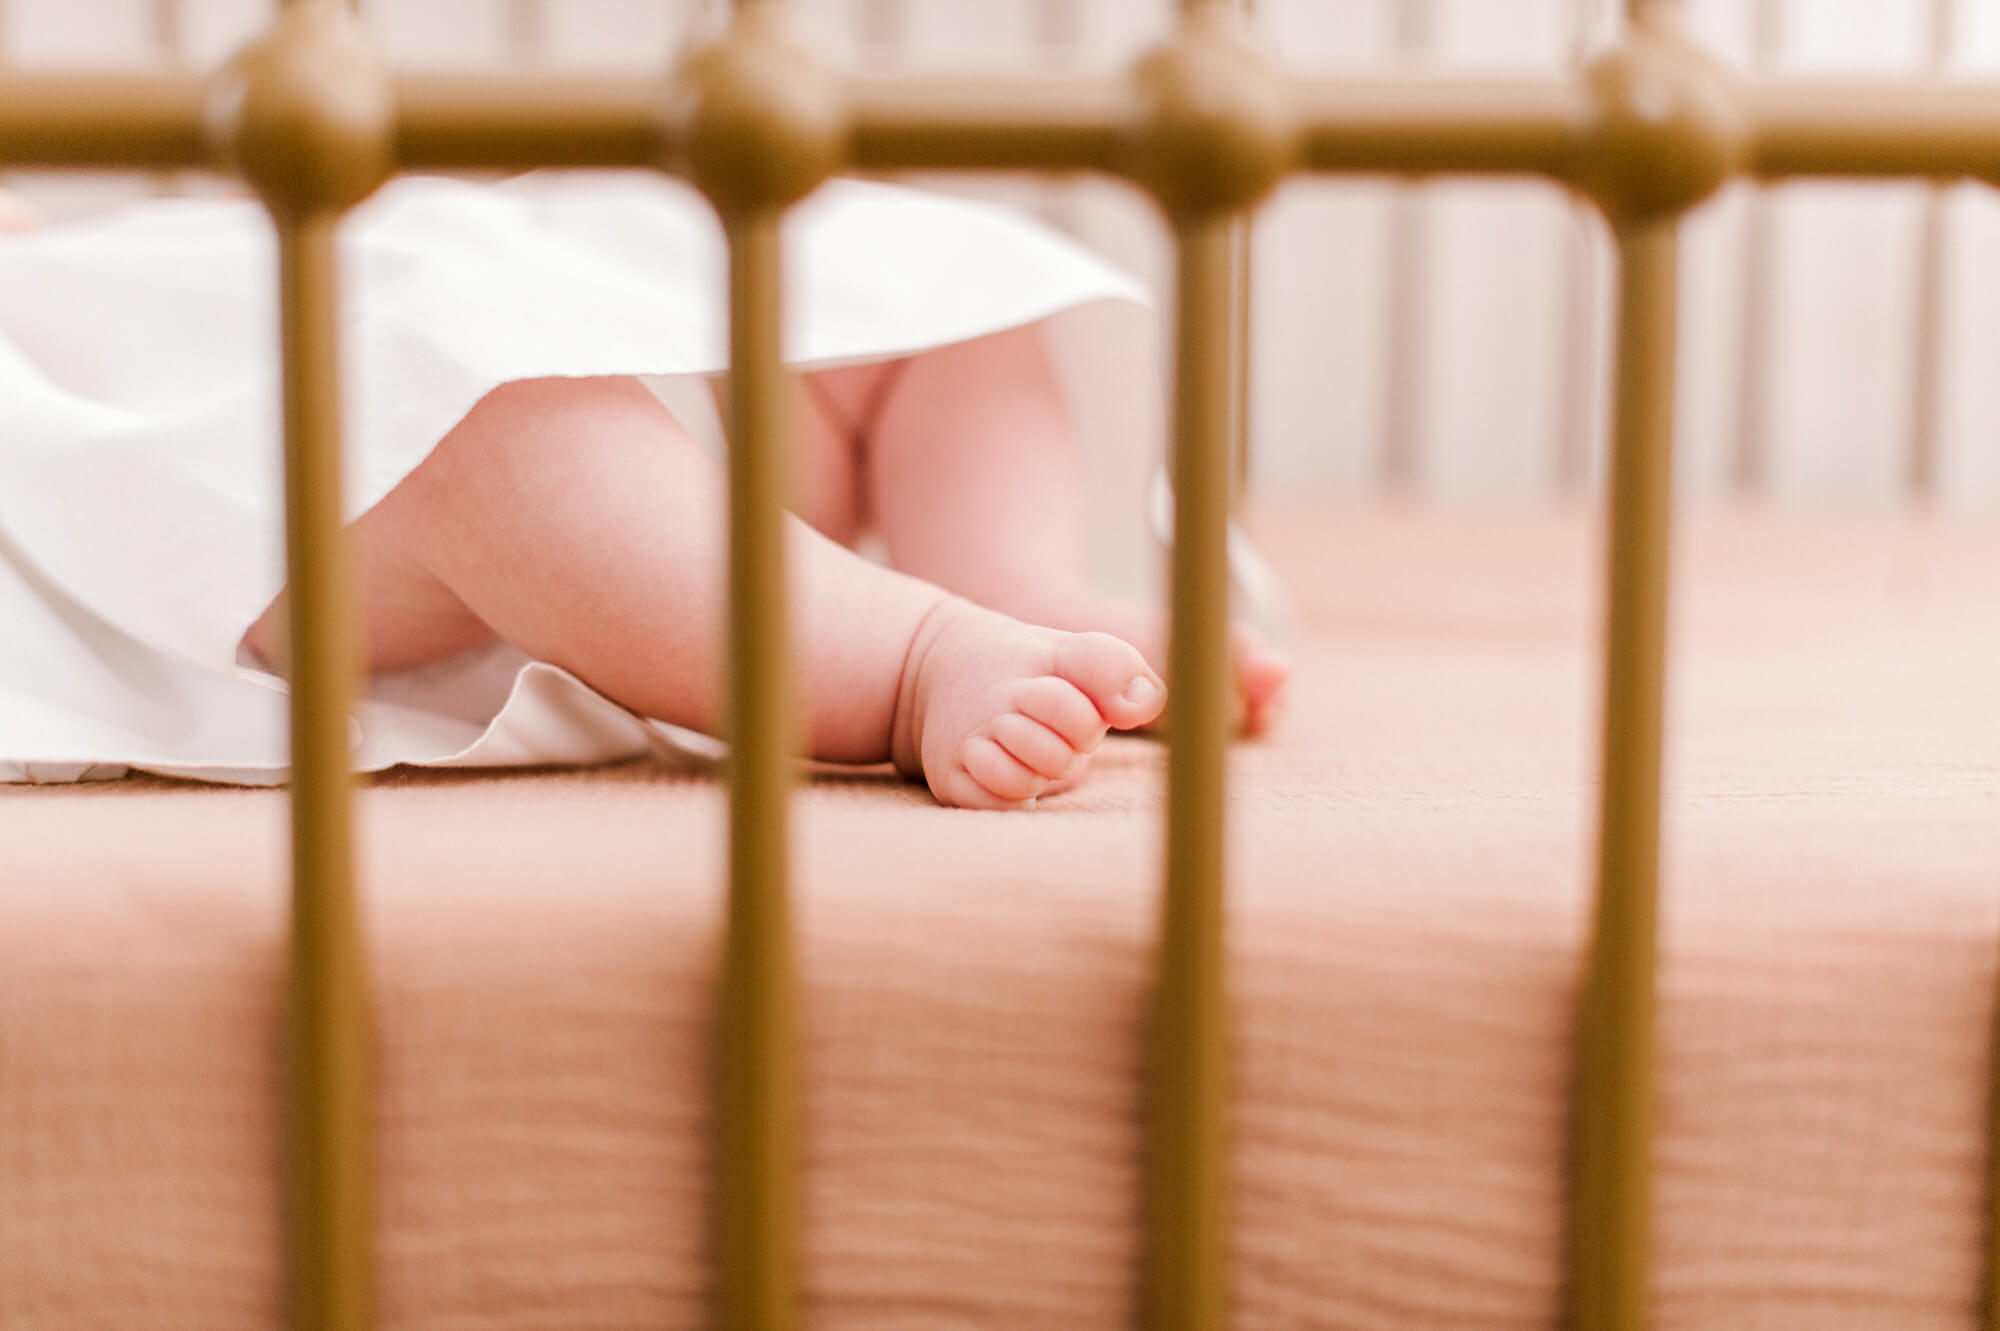 Ten tiny little toes seen through the bars of a beautiful golden crib, Surfside pediatrics would be a wonderful fit for this little human. 